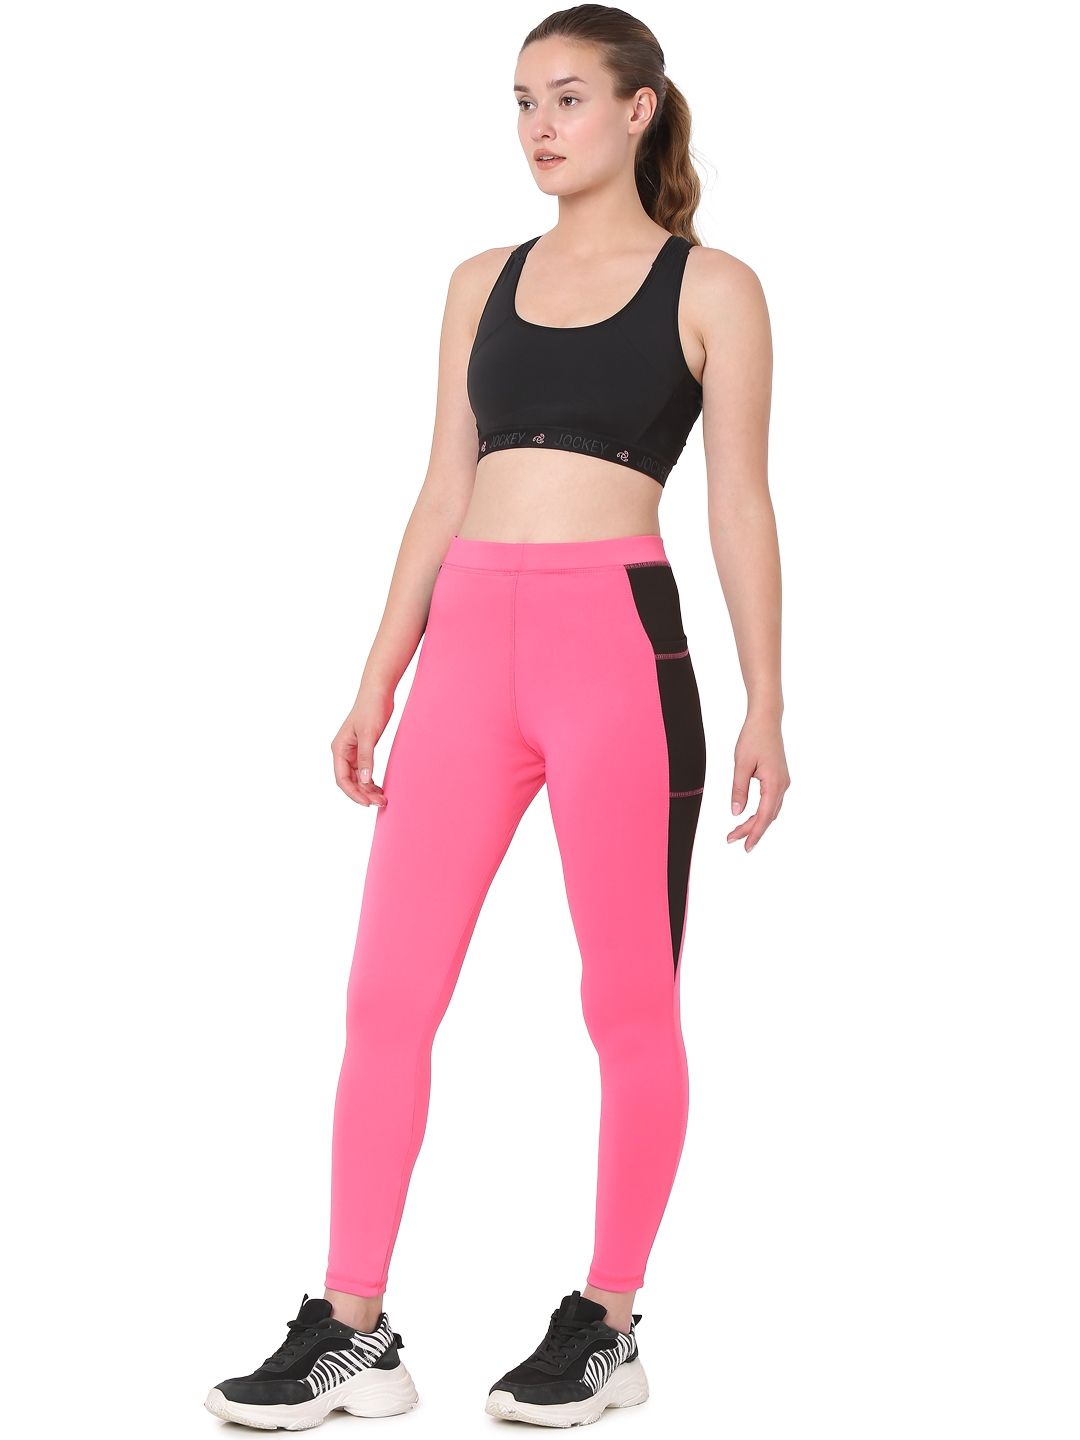 Smarty Pants women's stretchable mid-high rise waist pink color